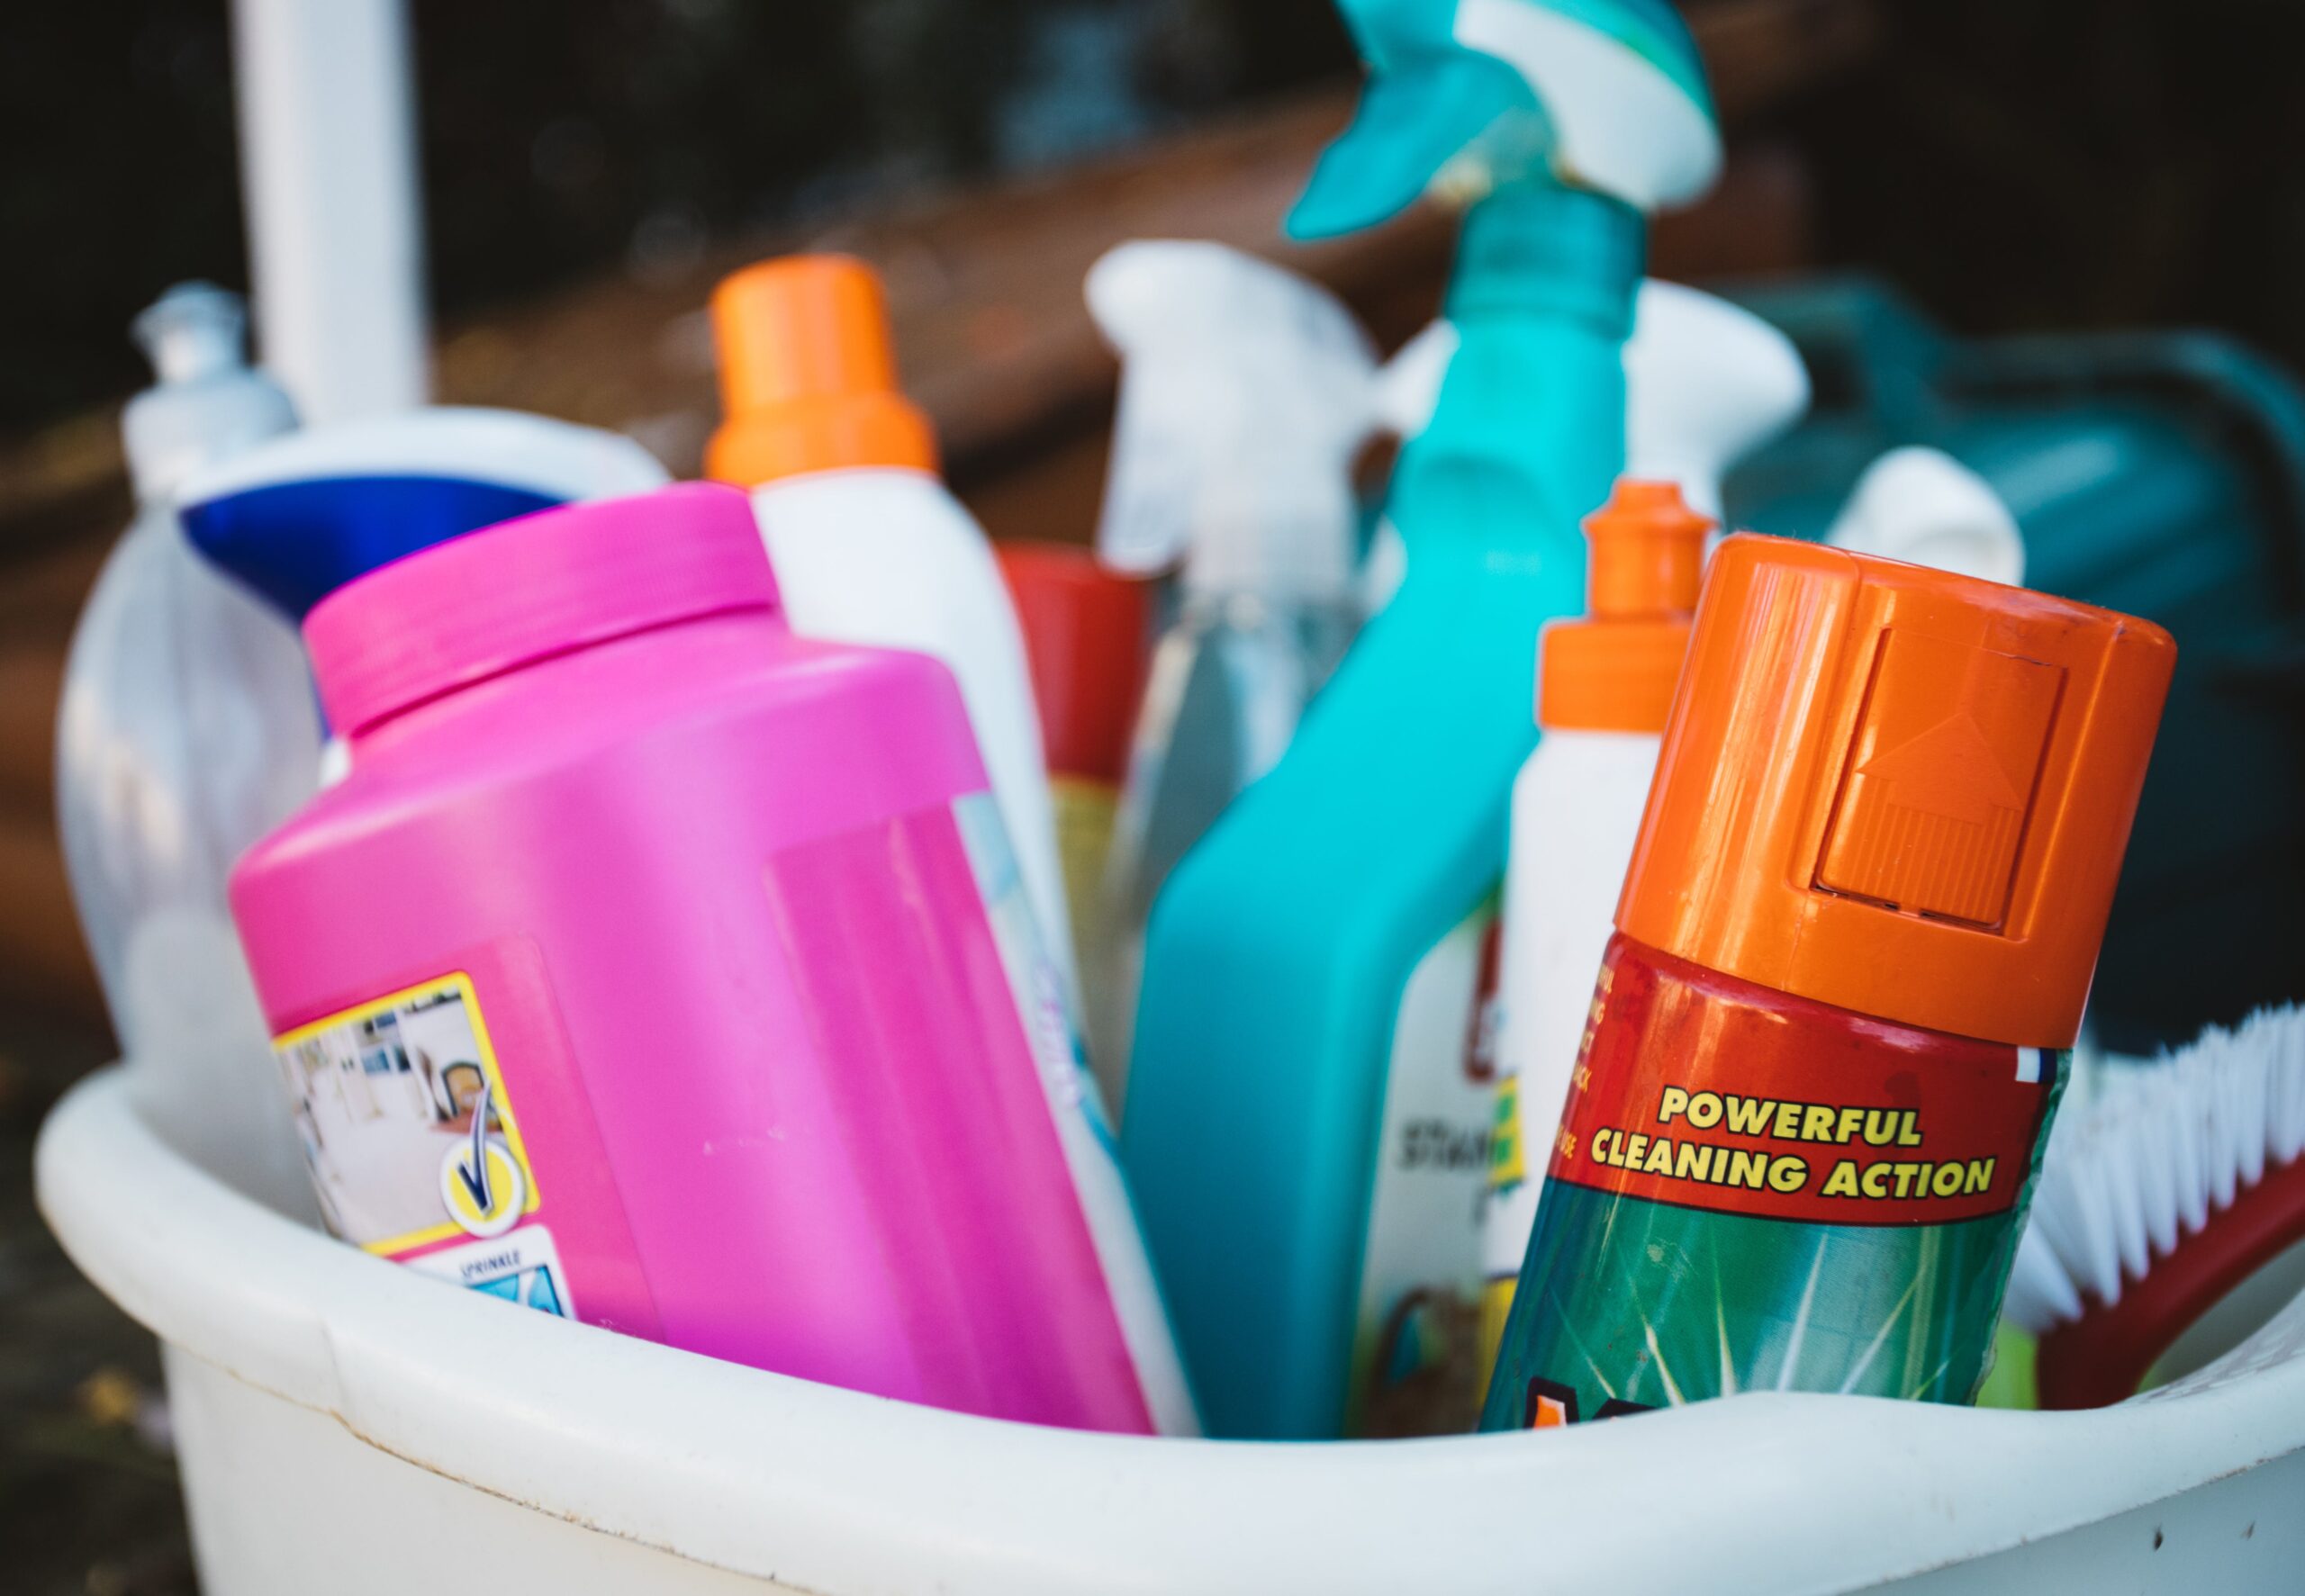 A close up of a plastic tub full of cleaning supplies